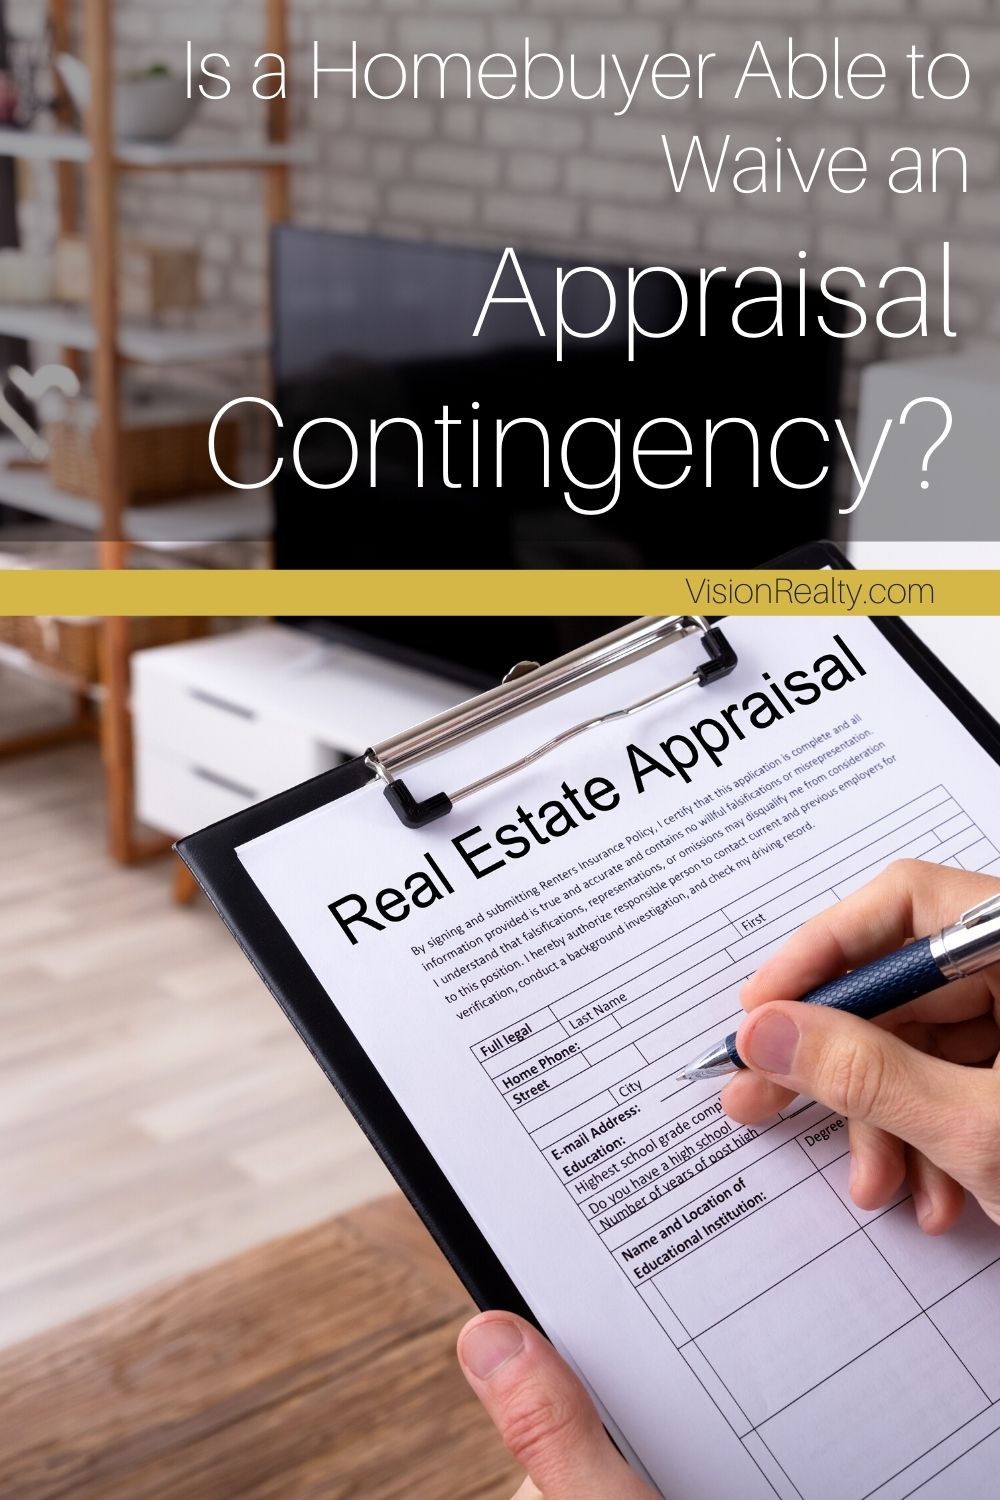 Is a Homebuyer Able to Waive an Appraisal Contingency?